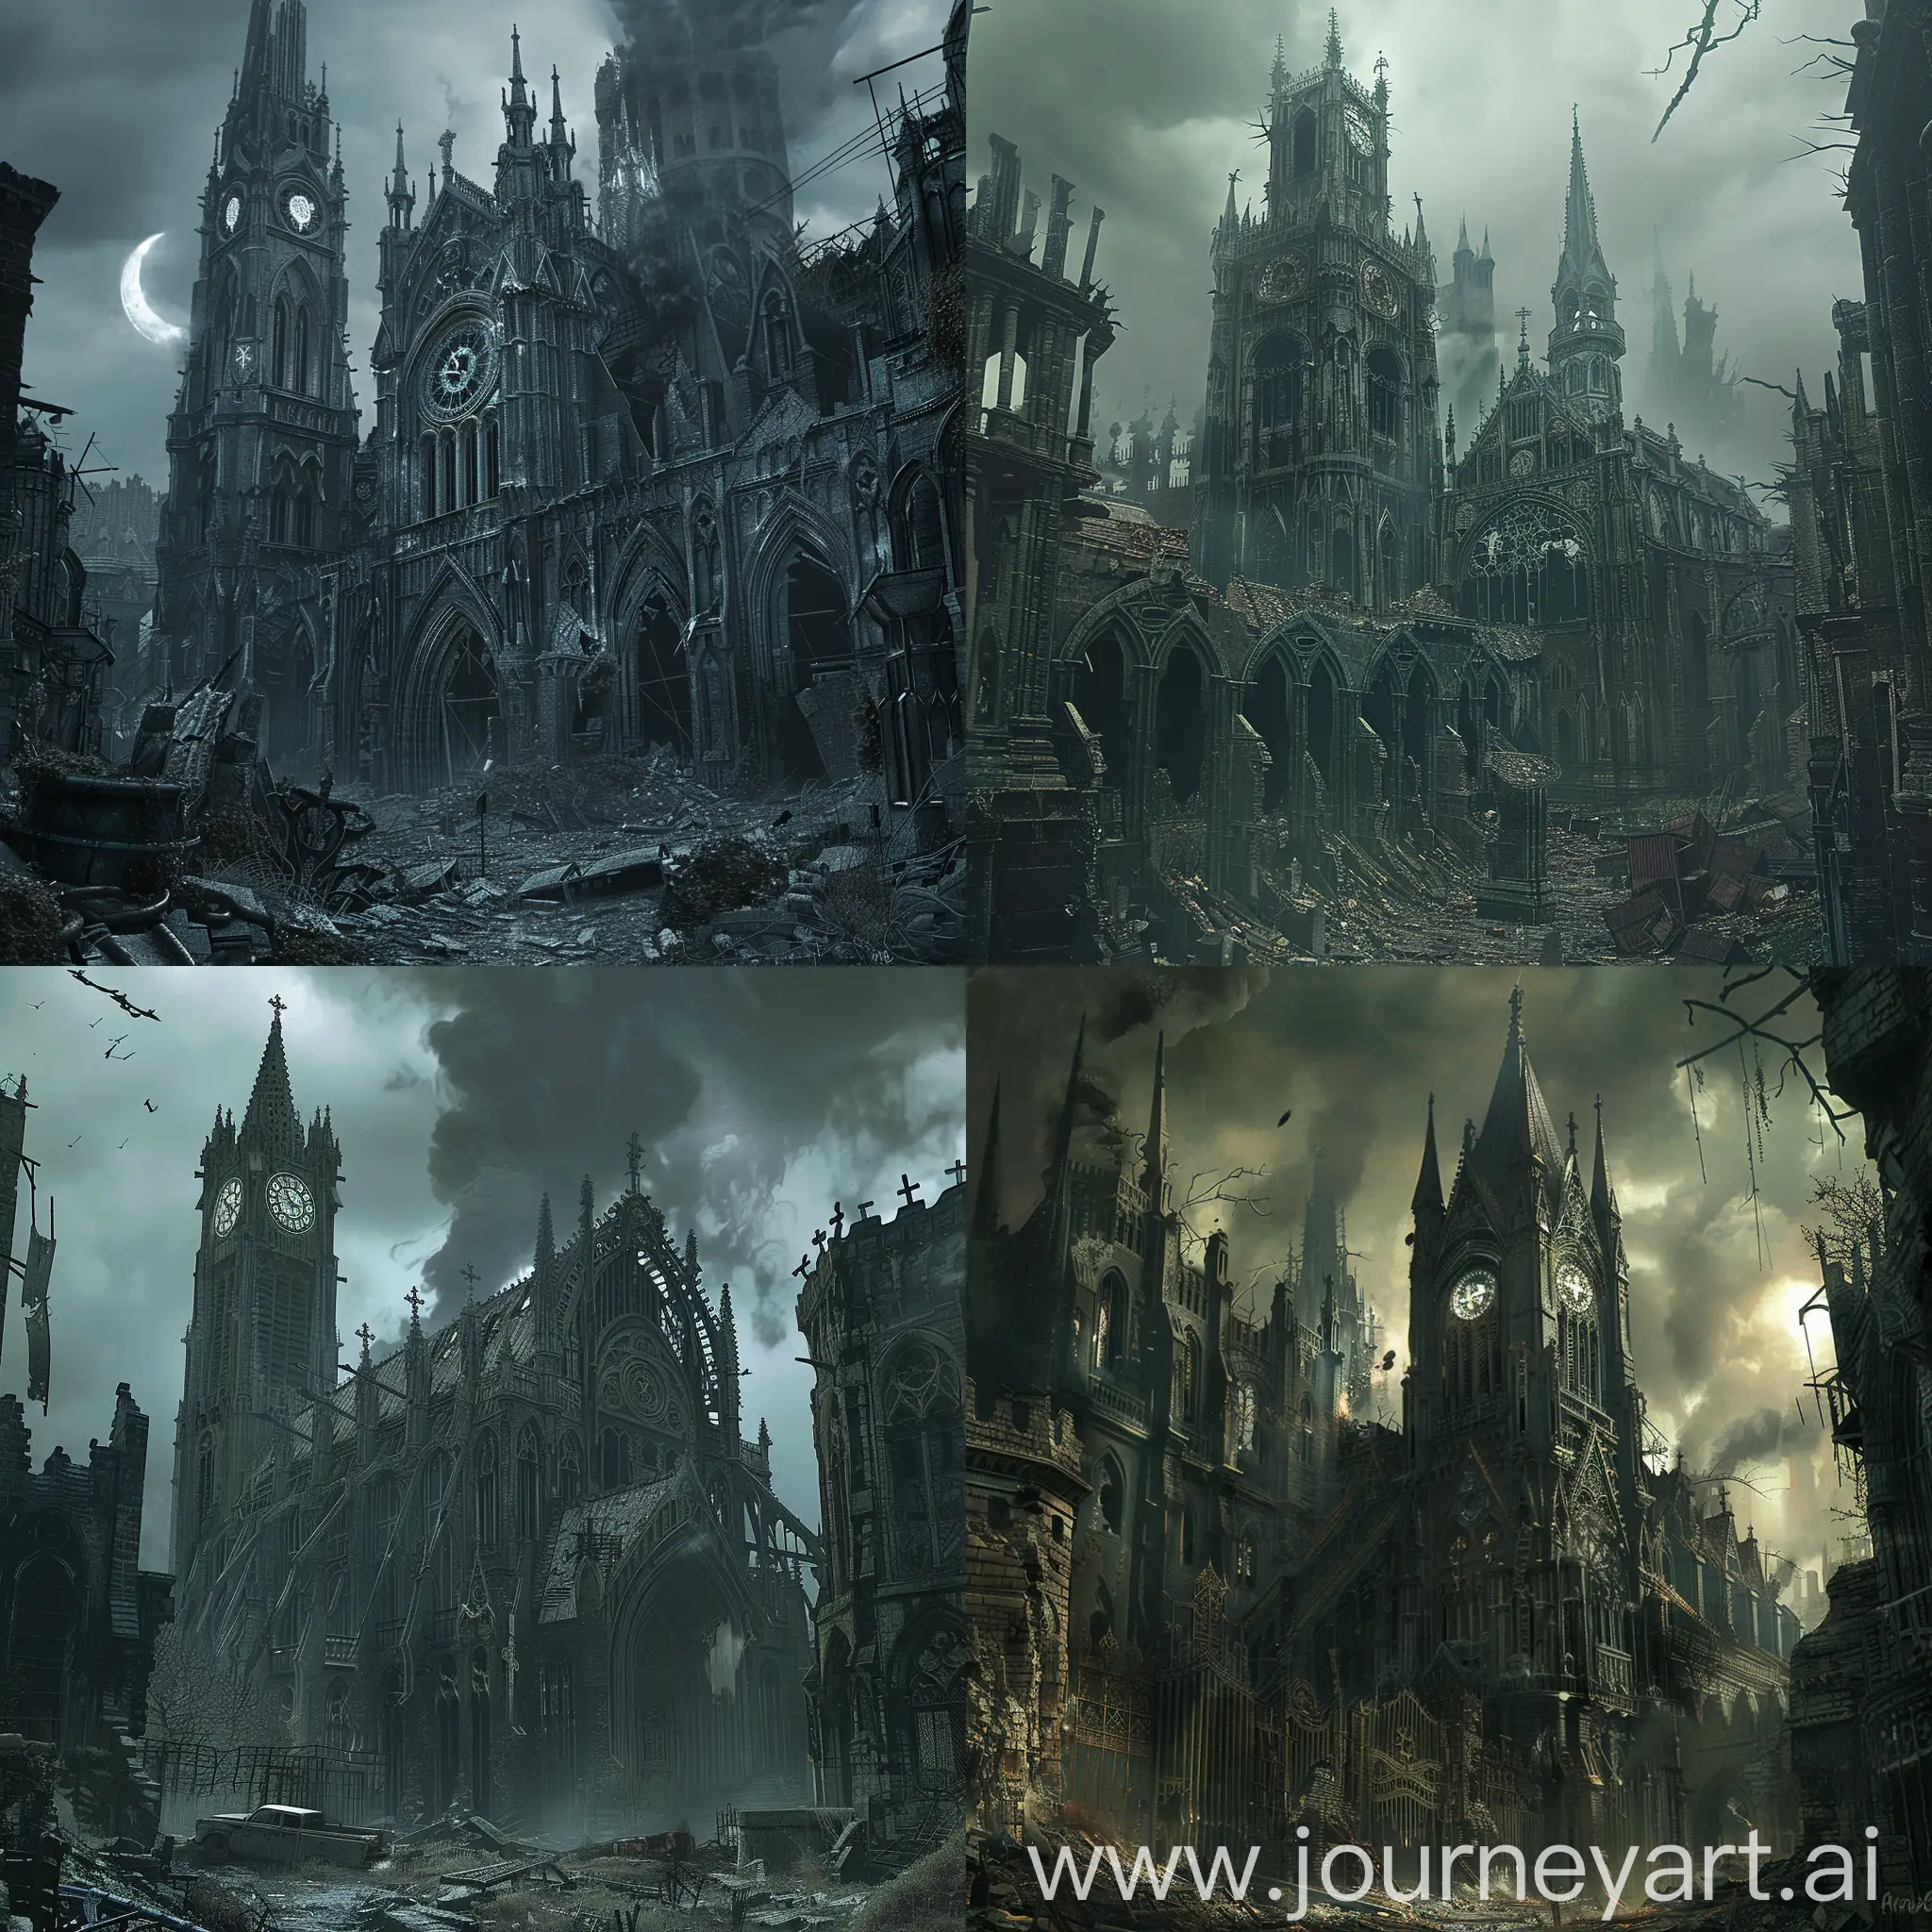 arafed image of a gothic church with a clock tower, ruined gothic cathedral, in postapocalypse city, in ruin gothic cathedral, cathedral!!!!!, destroyed monastery, cathedral, ornate city ruins, scary gothic architecture, post - apocalyptic magic kingdom, ruined architecture, destroyed church, dark gloomy church, cyberpunk church, cathedral of sun, bloodborne cathedral